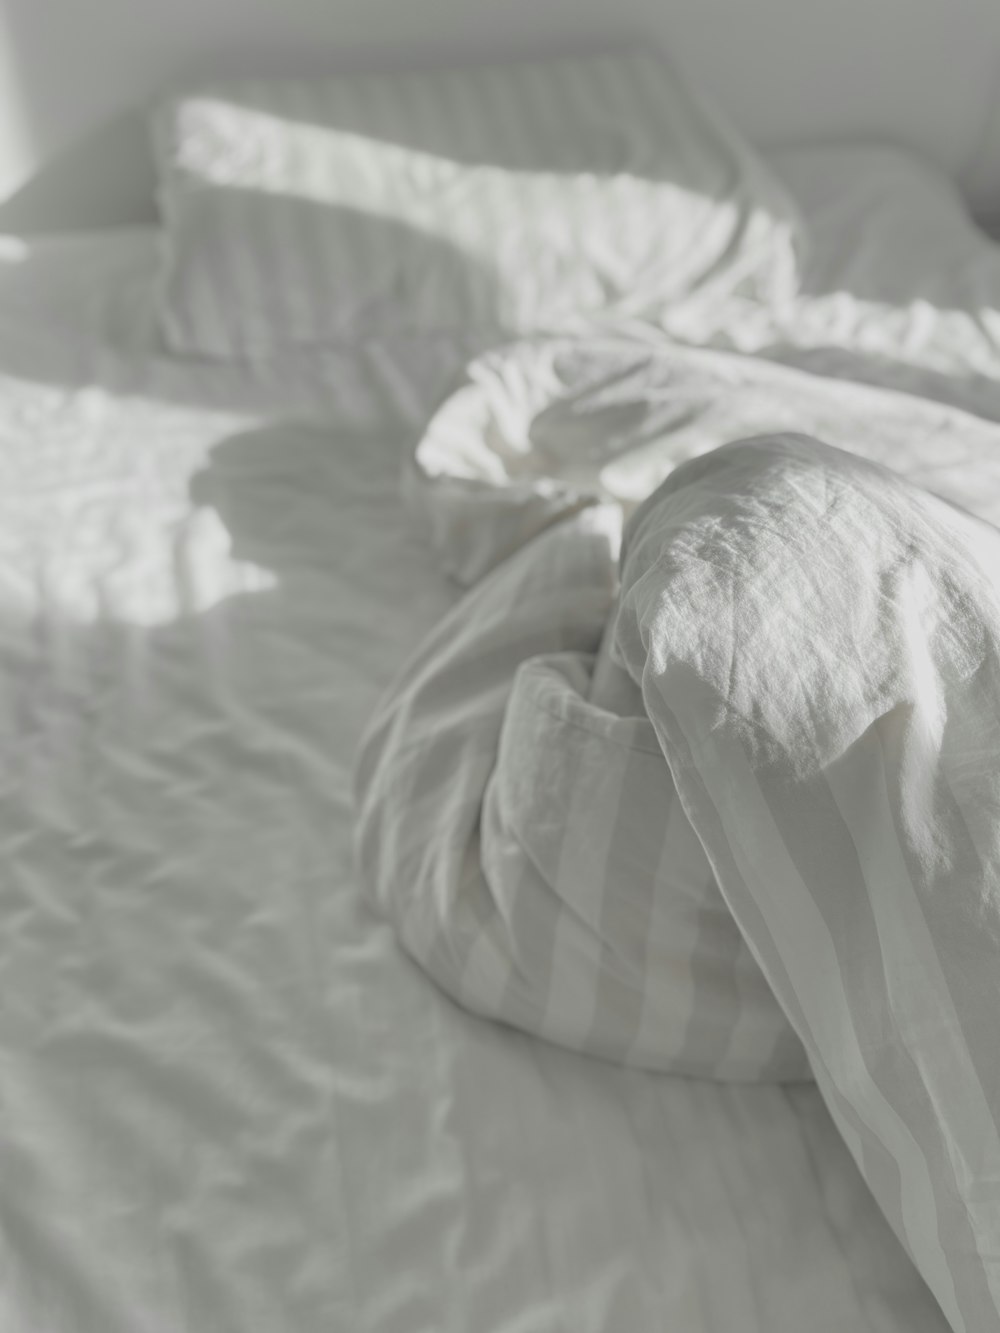 How often should bed sheets be washed?